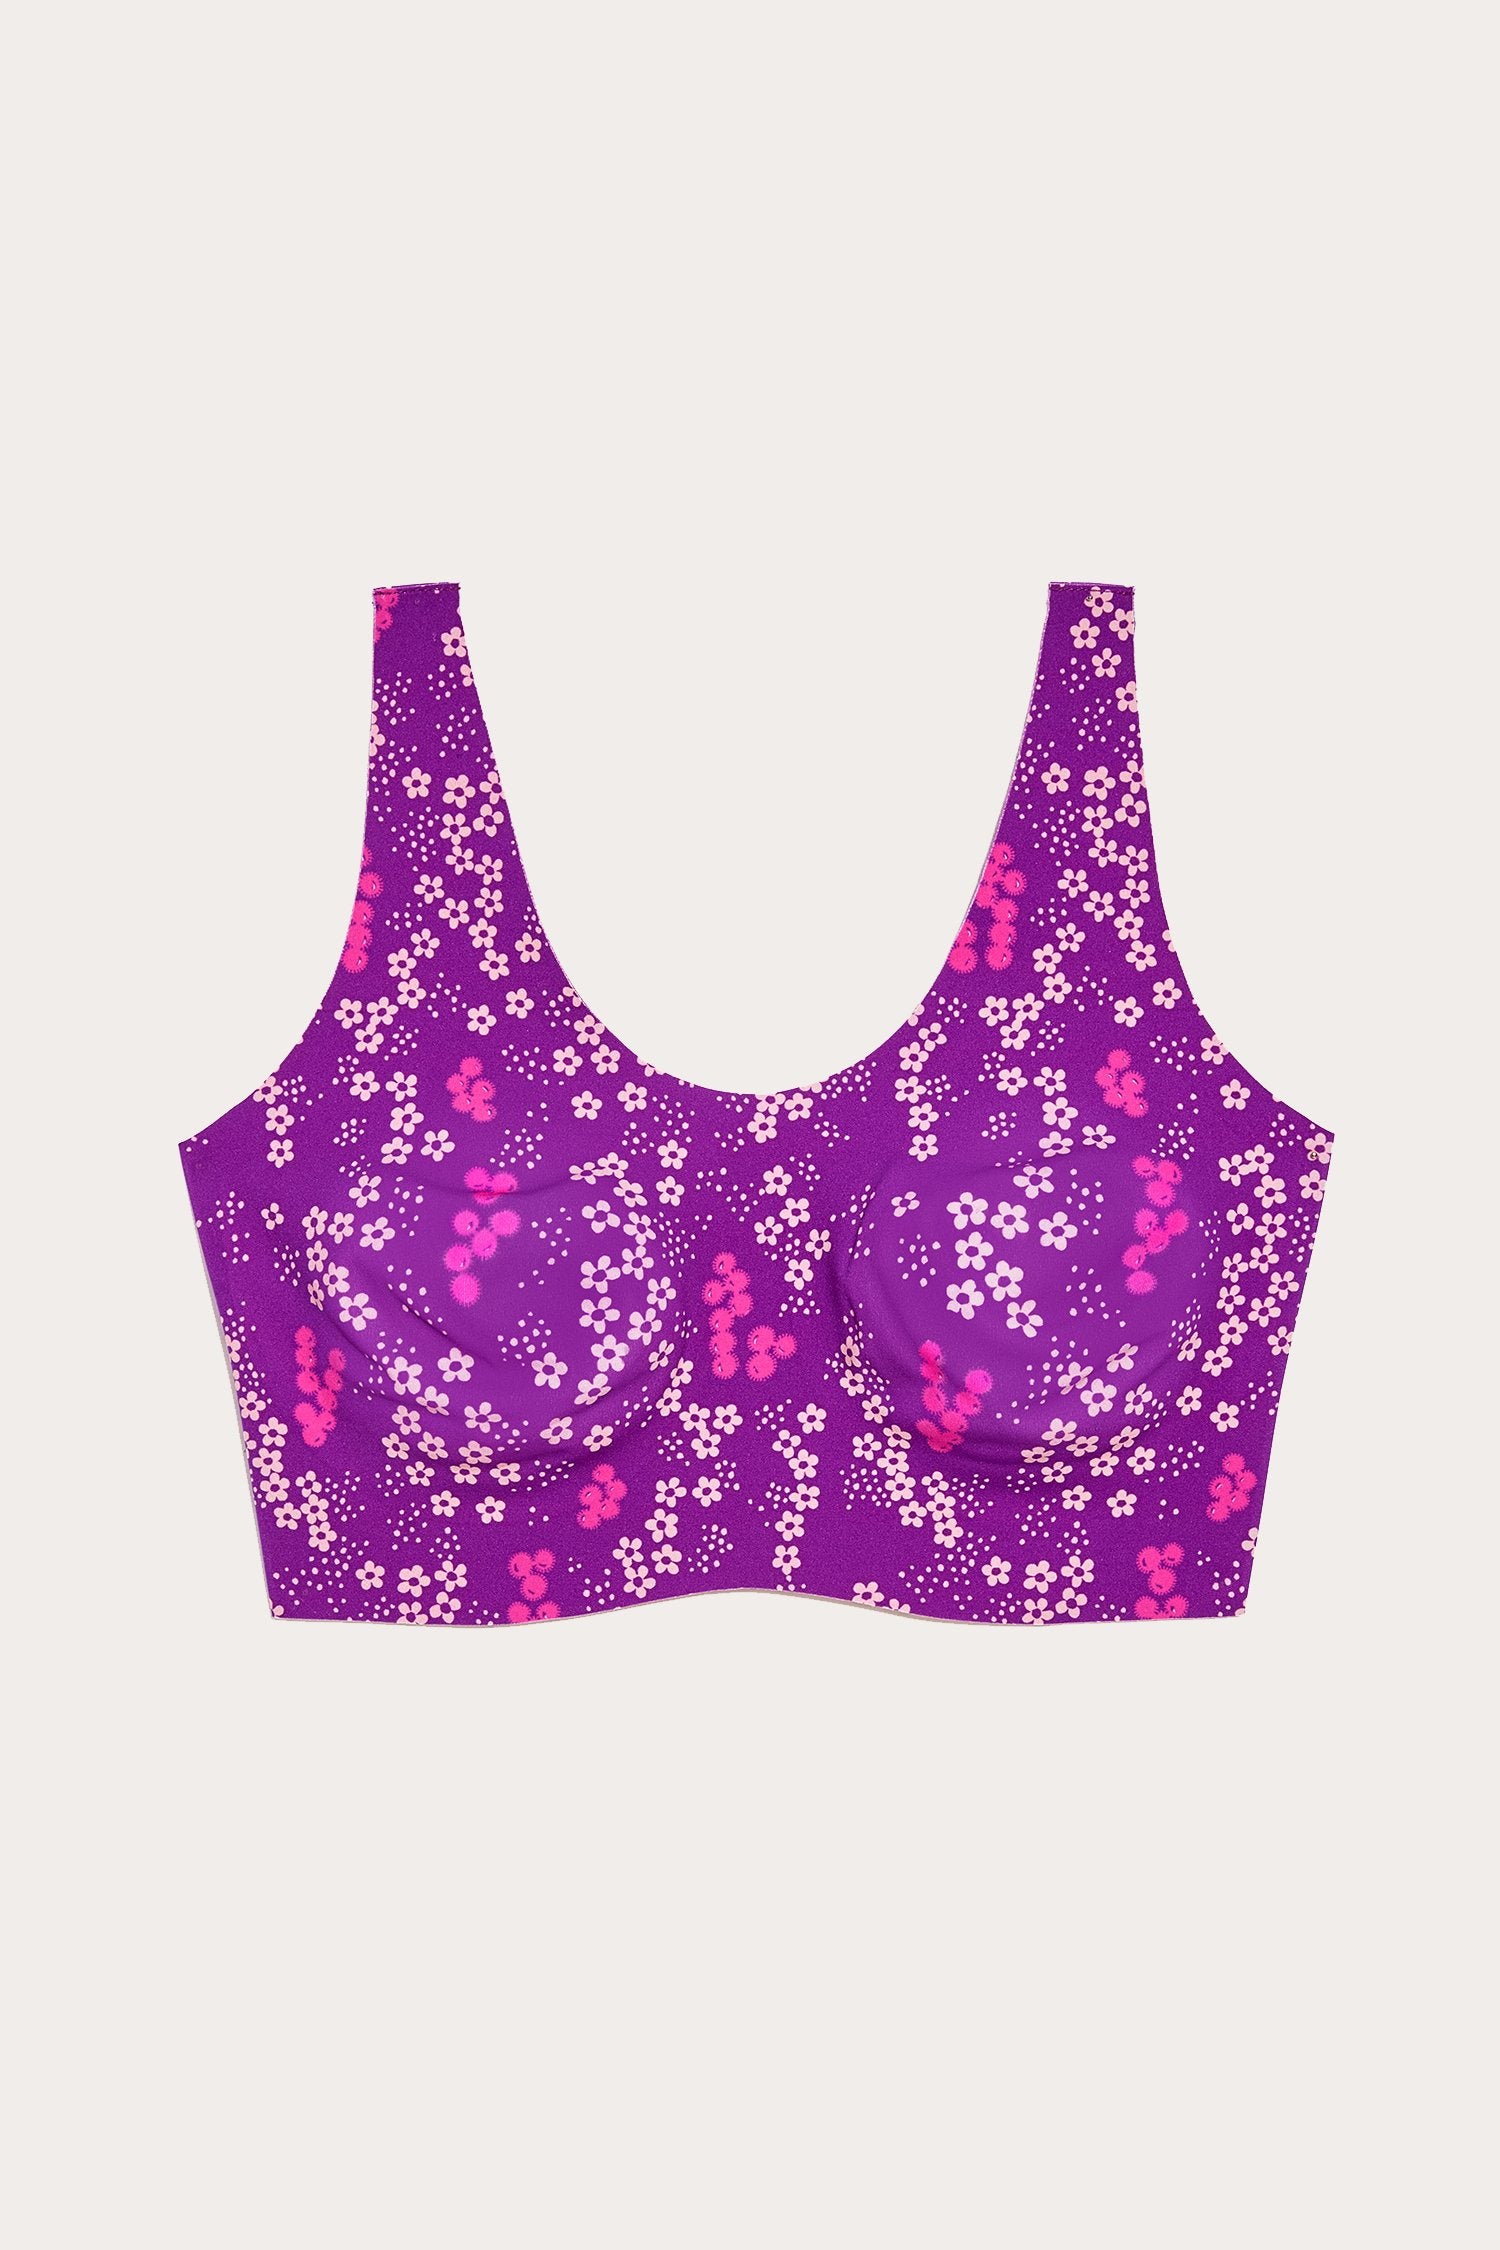 Anna Sui x Knix Ditsy Blooms Luxe Pullover Bra - Anna Sui